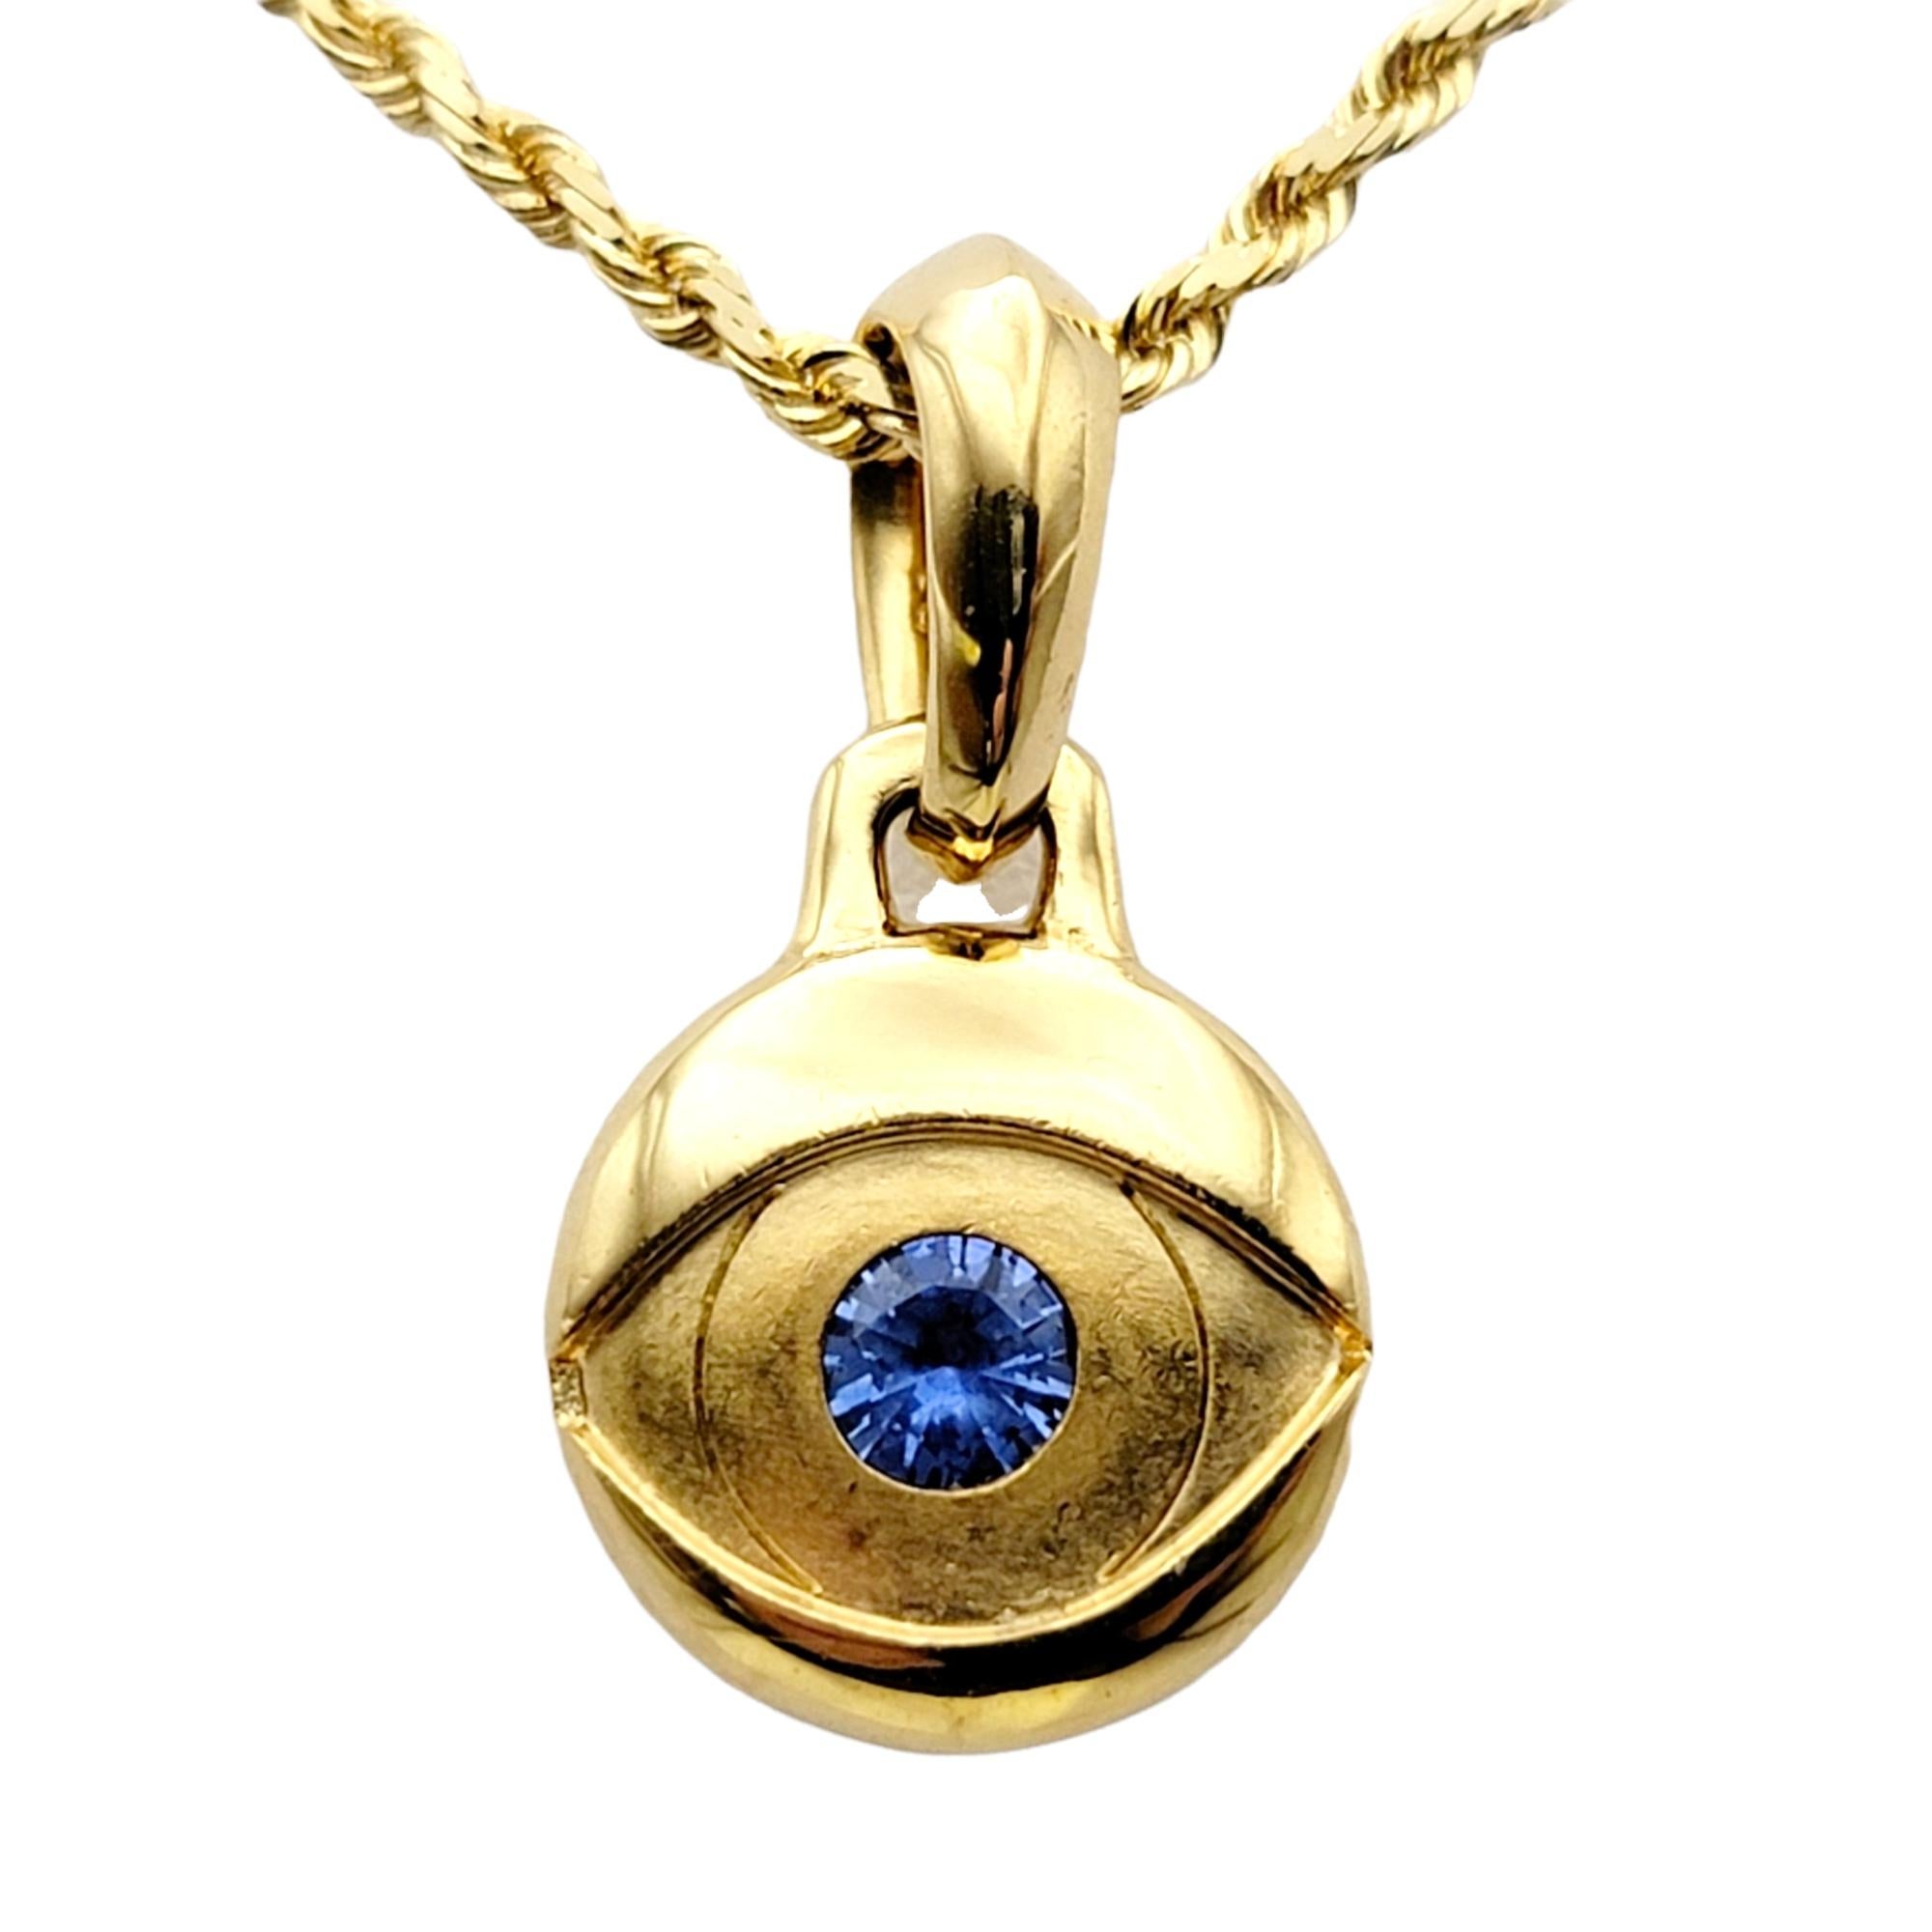 Gorgeous modern pendant by David Yurman featuring the evil eye motif. A single round blue sapphire is set at the center of a brushed and polished 18 karat yellow gold 'eye'. 

*Please note this listing is for the pendant only. No necklace or cord is